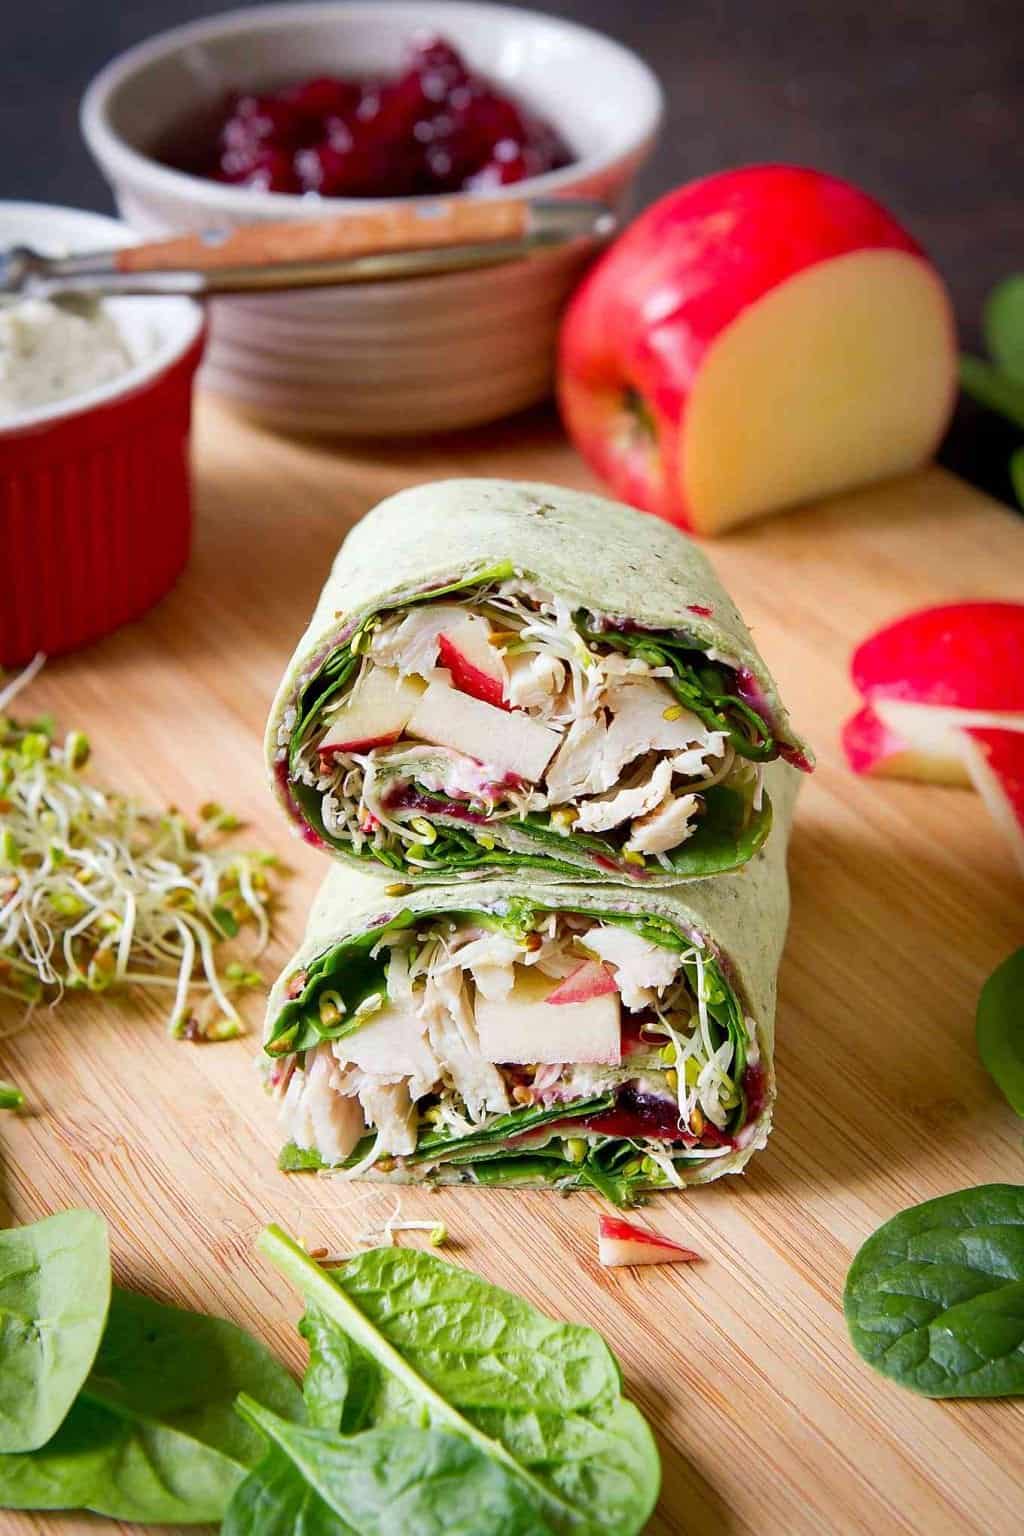 Turkey, cranberry and vegetable wrap sandwich. Apple, broccoli sprouts and bowls in the background.